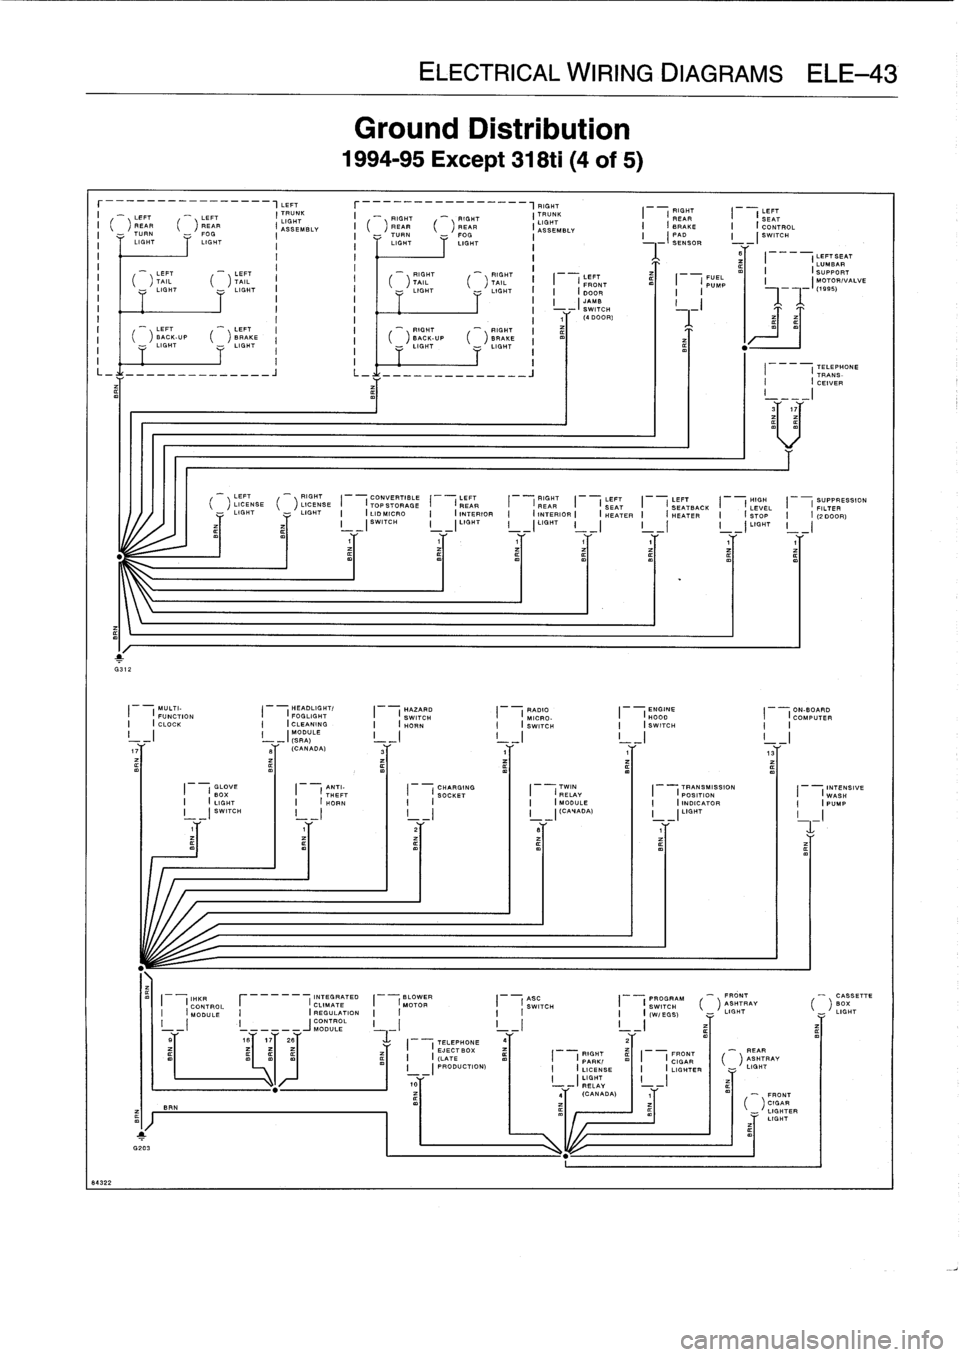 BMW 328i 1998 E36 User Guide 
ELECTRICAL
WIRING
DIAGRAMSELE-43

r----------_-__--,LEFT

	

r---__-------~_--,FIGHT
I

	

-

	

RIGHT

	

LIT
LEFT

	

"-

	

LEFT

	

I
IGHT
K

	

I

	

_

	

RIGHT

	



	

RIGHT

	

I
TRUNK
SEM